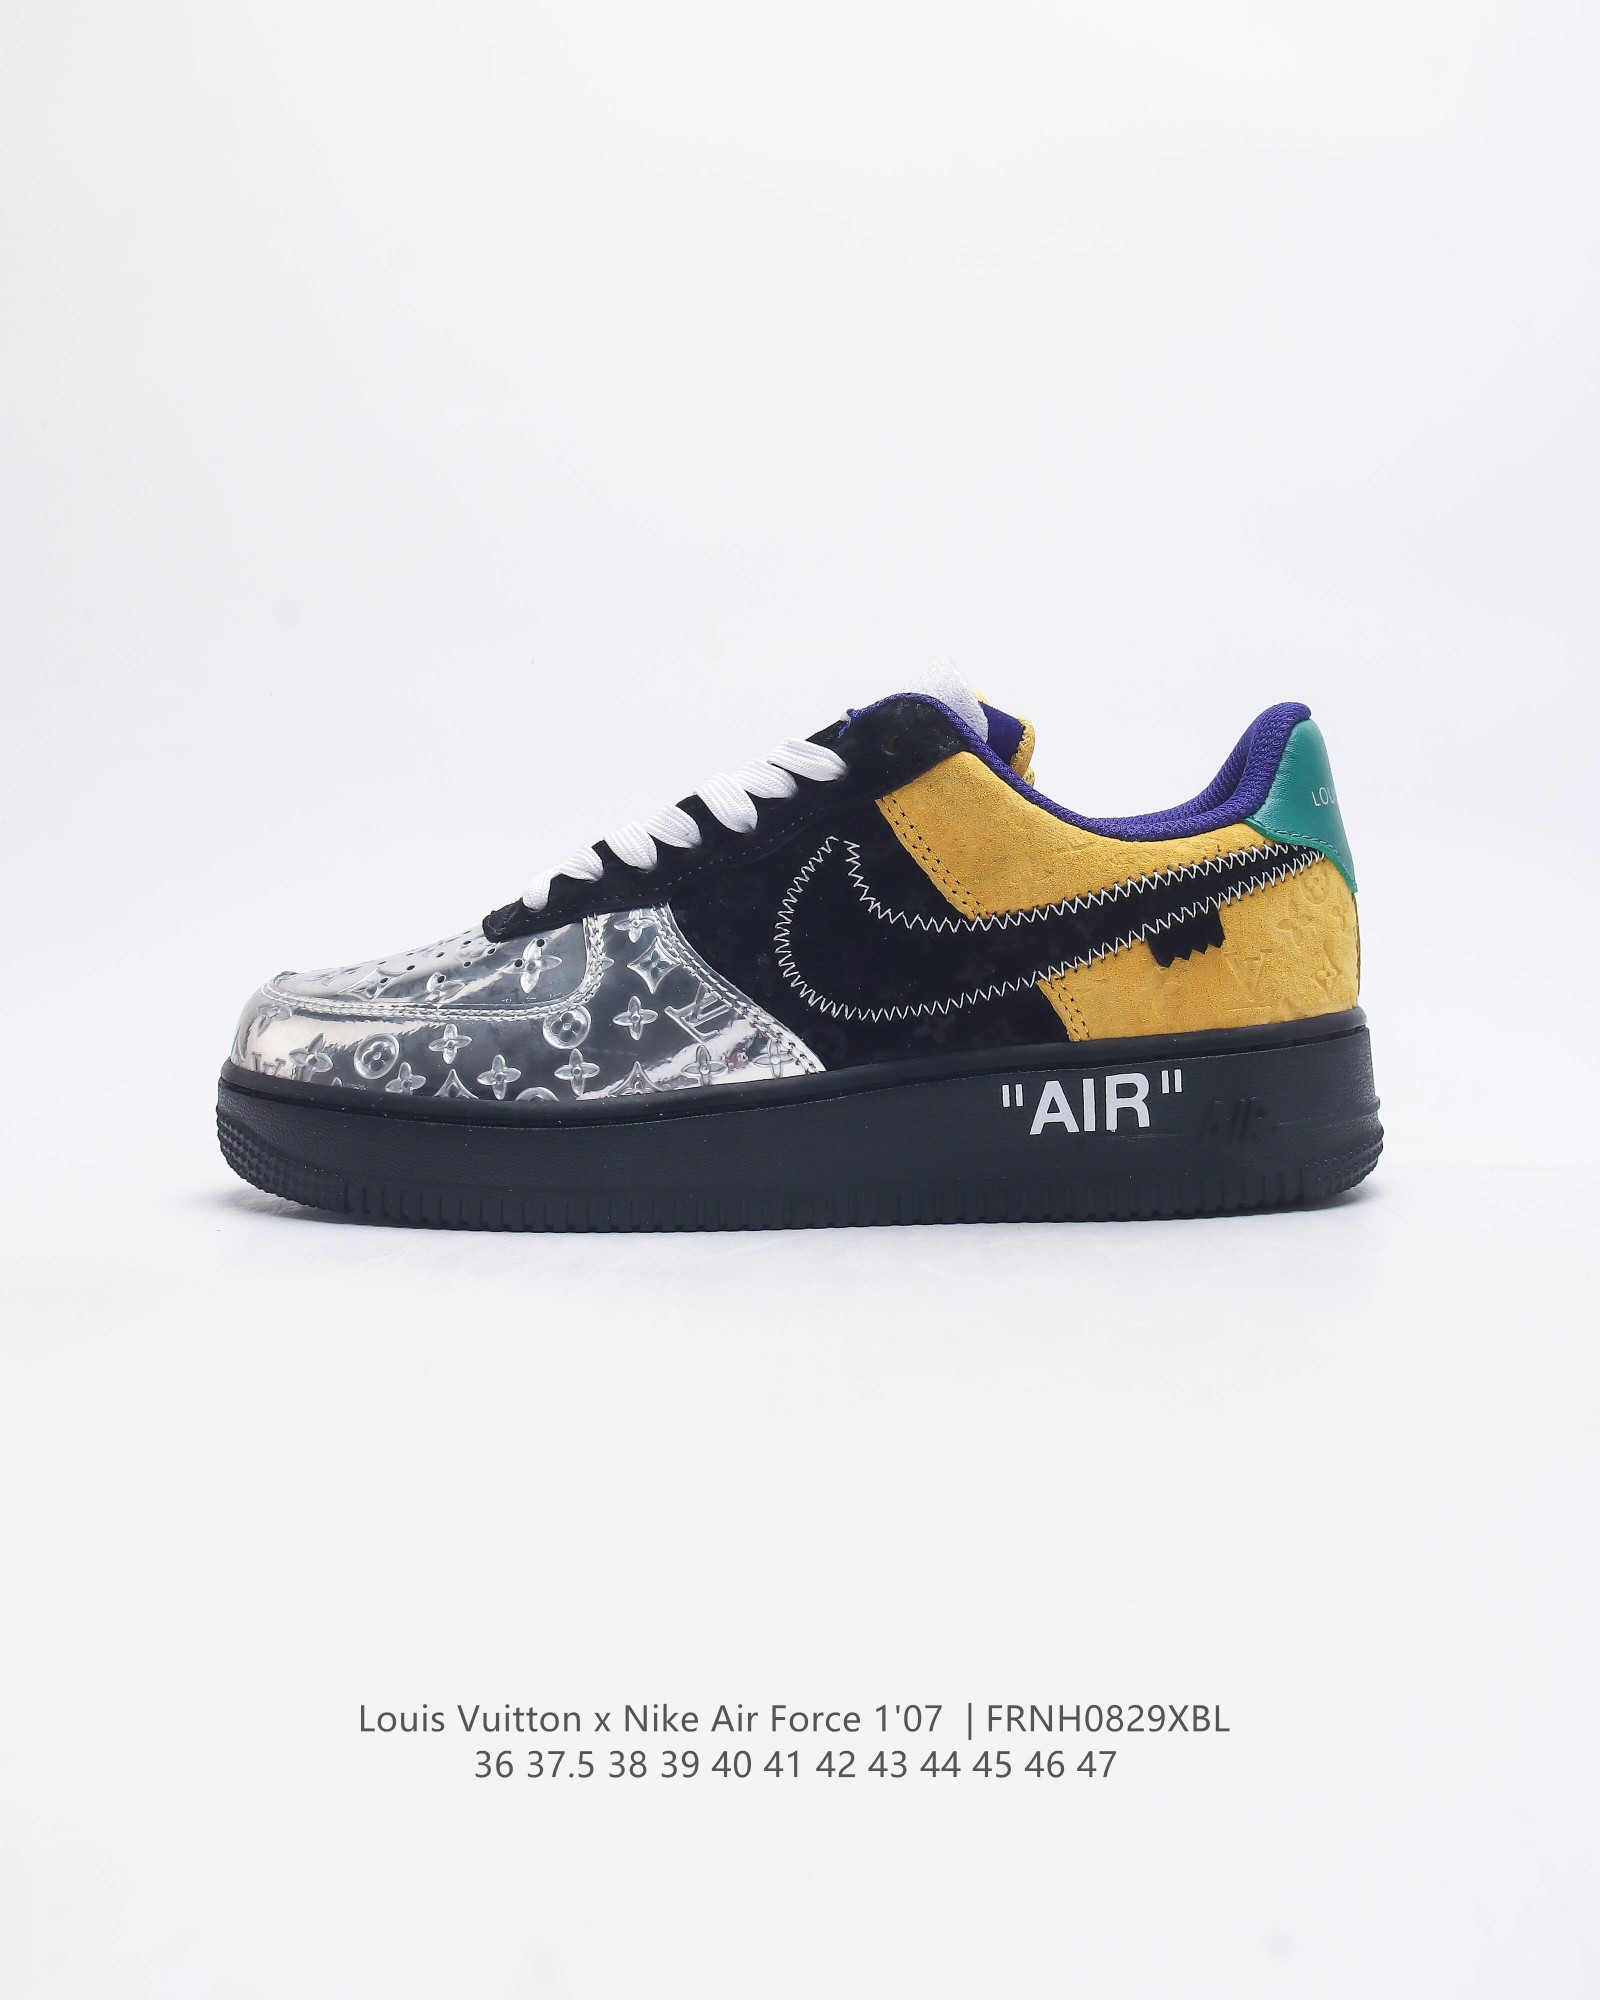 Nike Lv nike Air Force 1 Low X Lv force 1 36 37.5 38 39 40 41 42 43 44 45 46 47